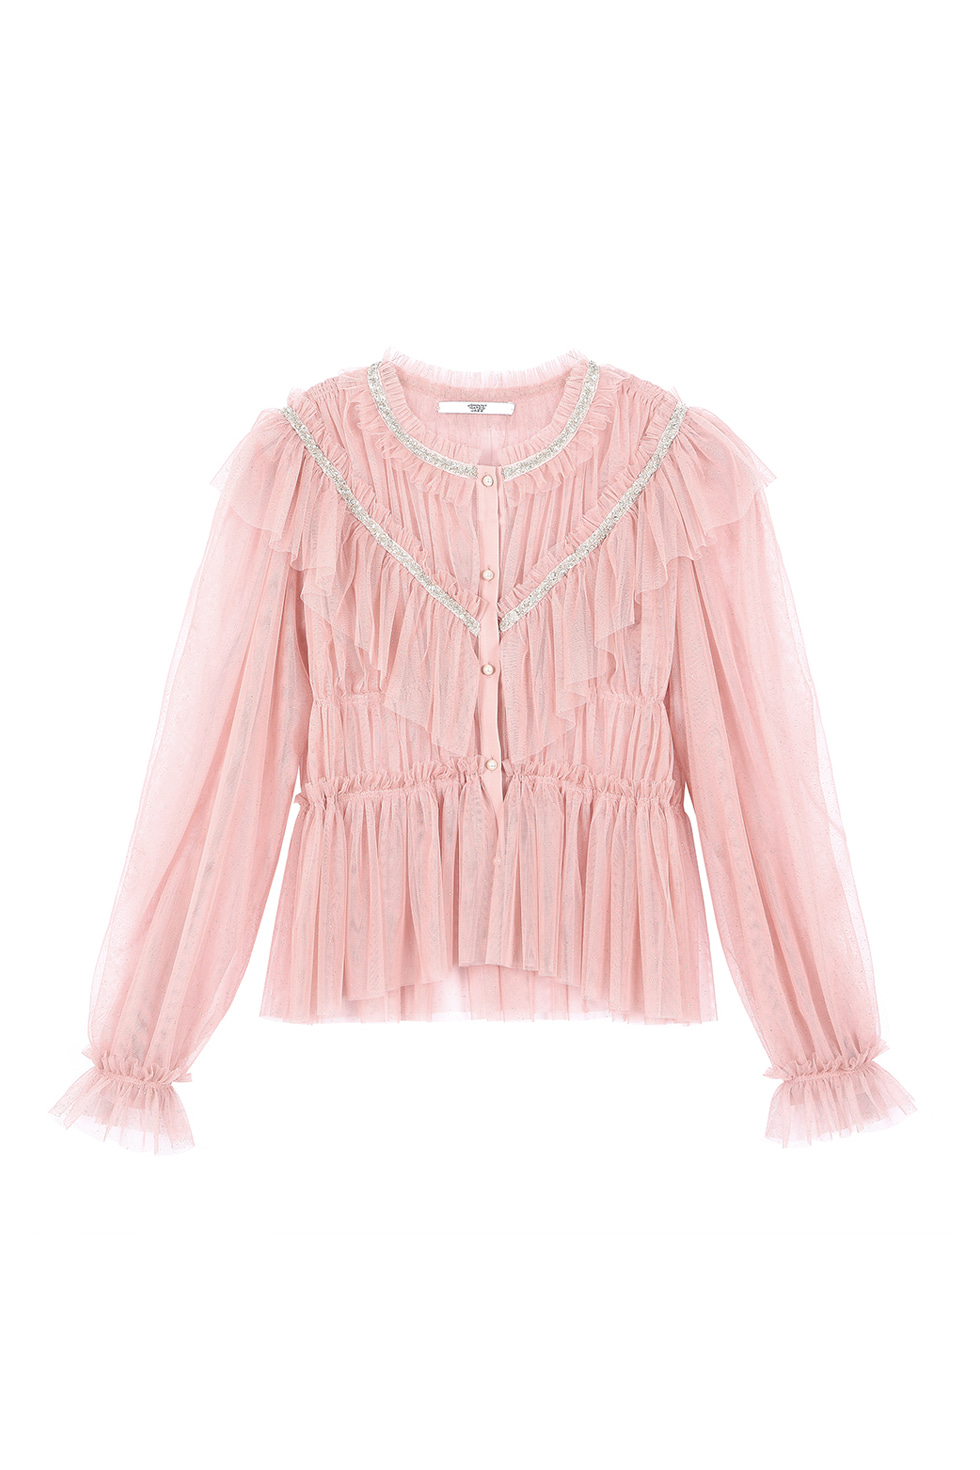 SPANGLE TULLE BLOUSE - PINK